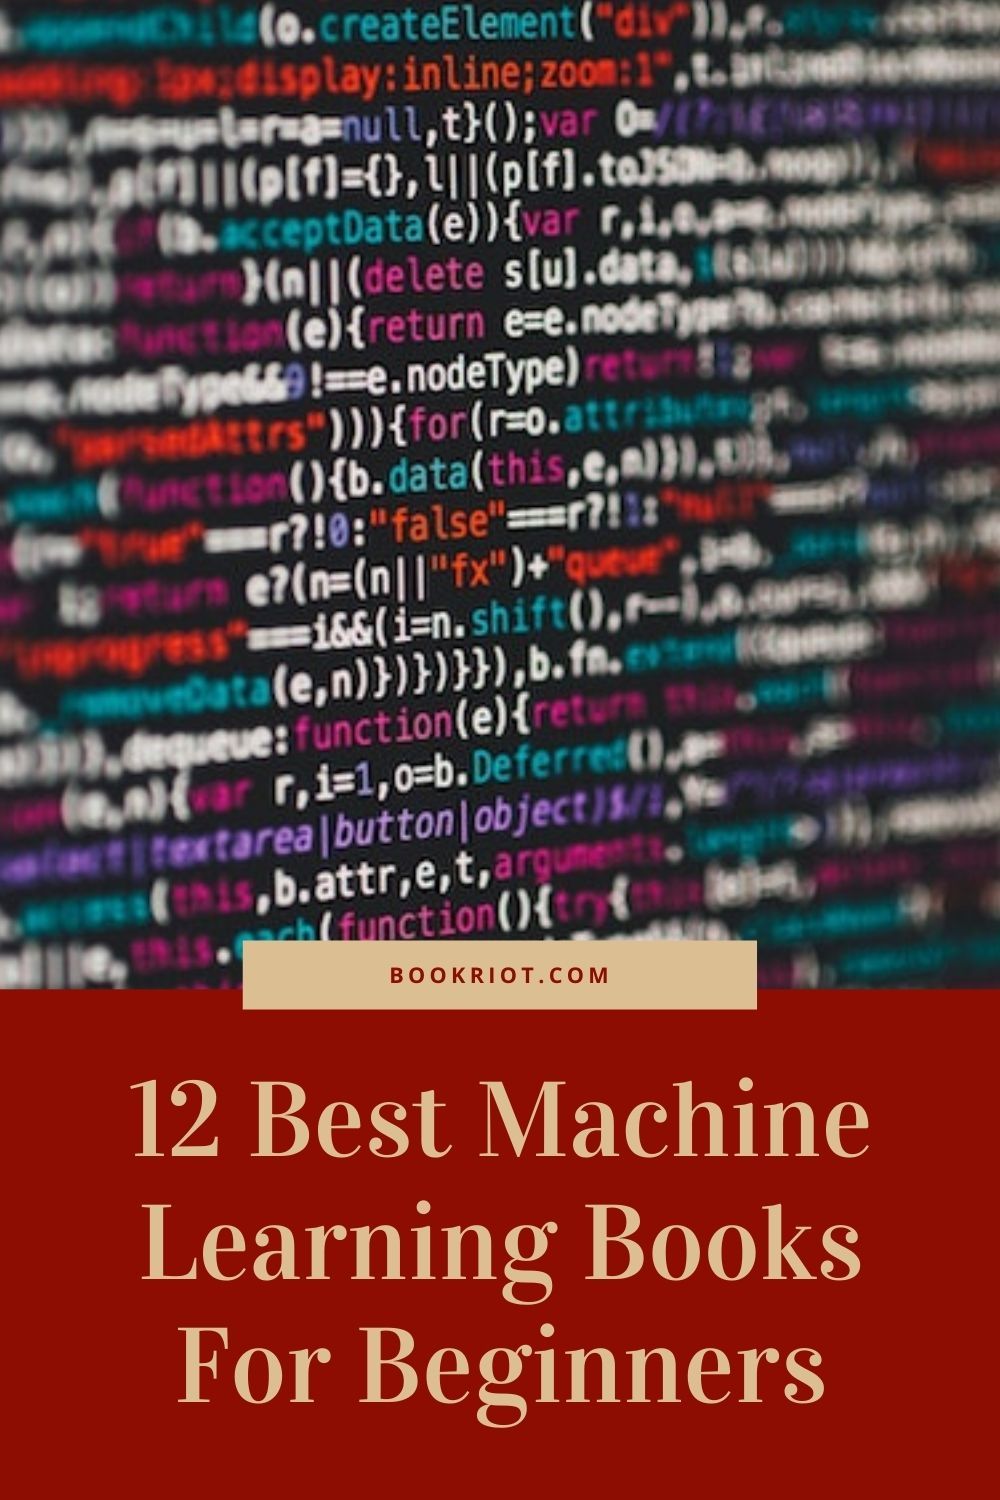 12 Best Machine Learning Books For Beginners Book Riot